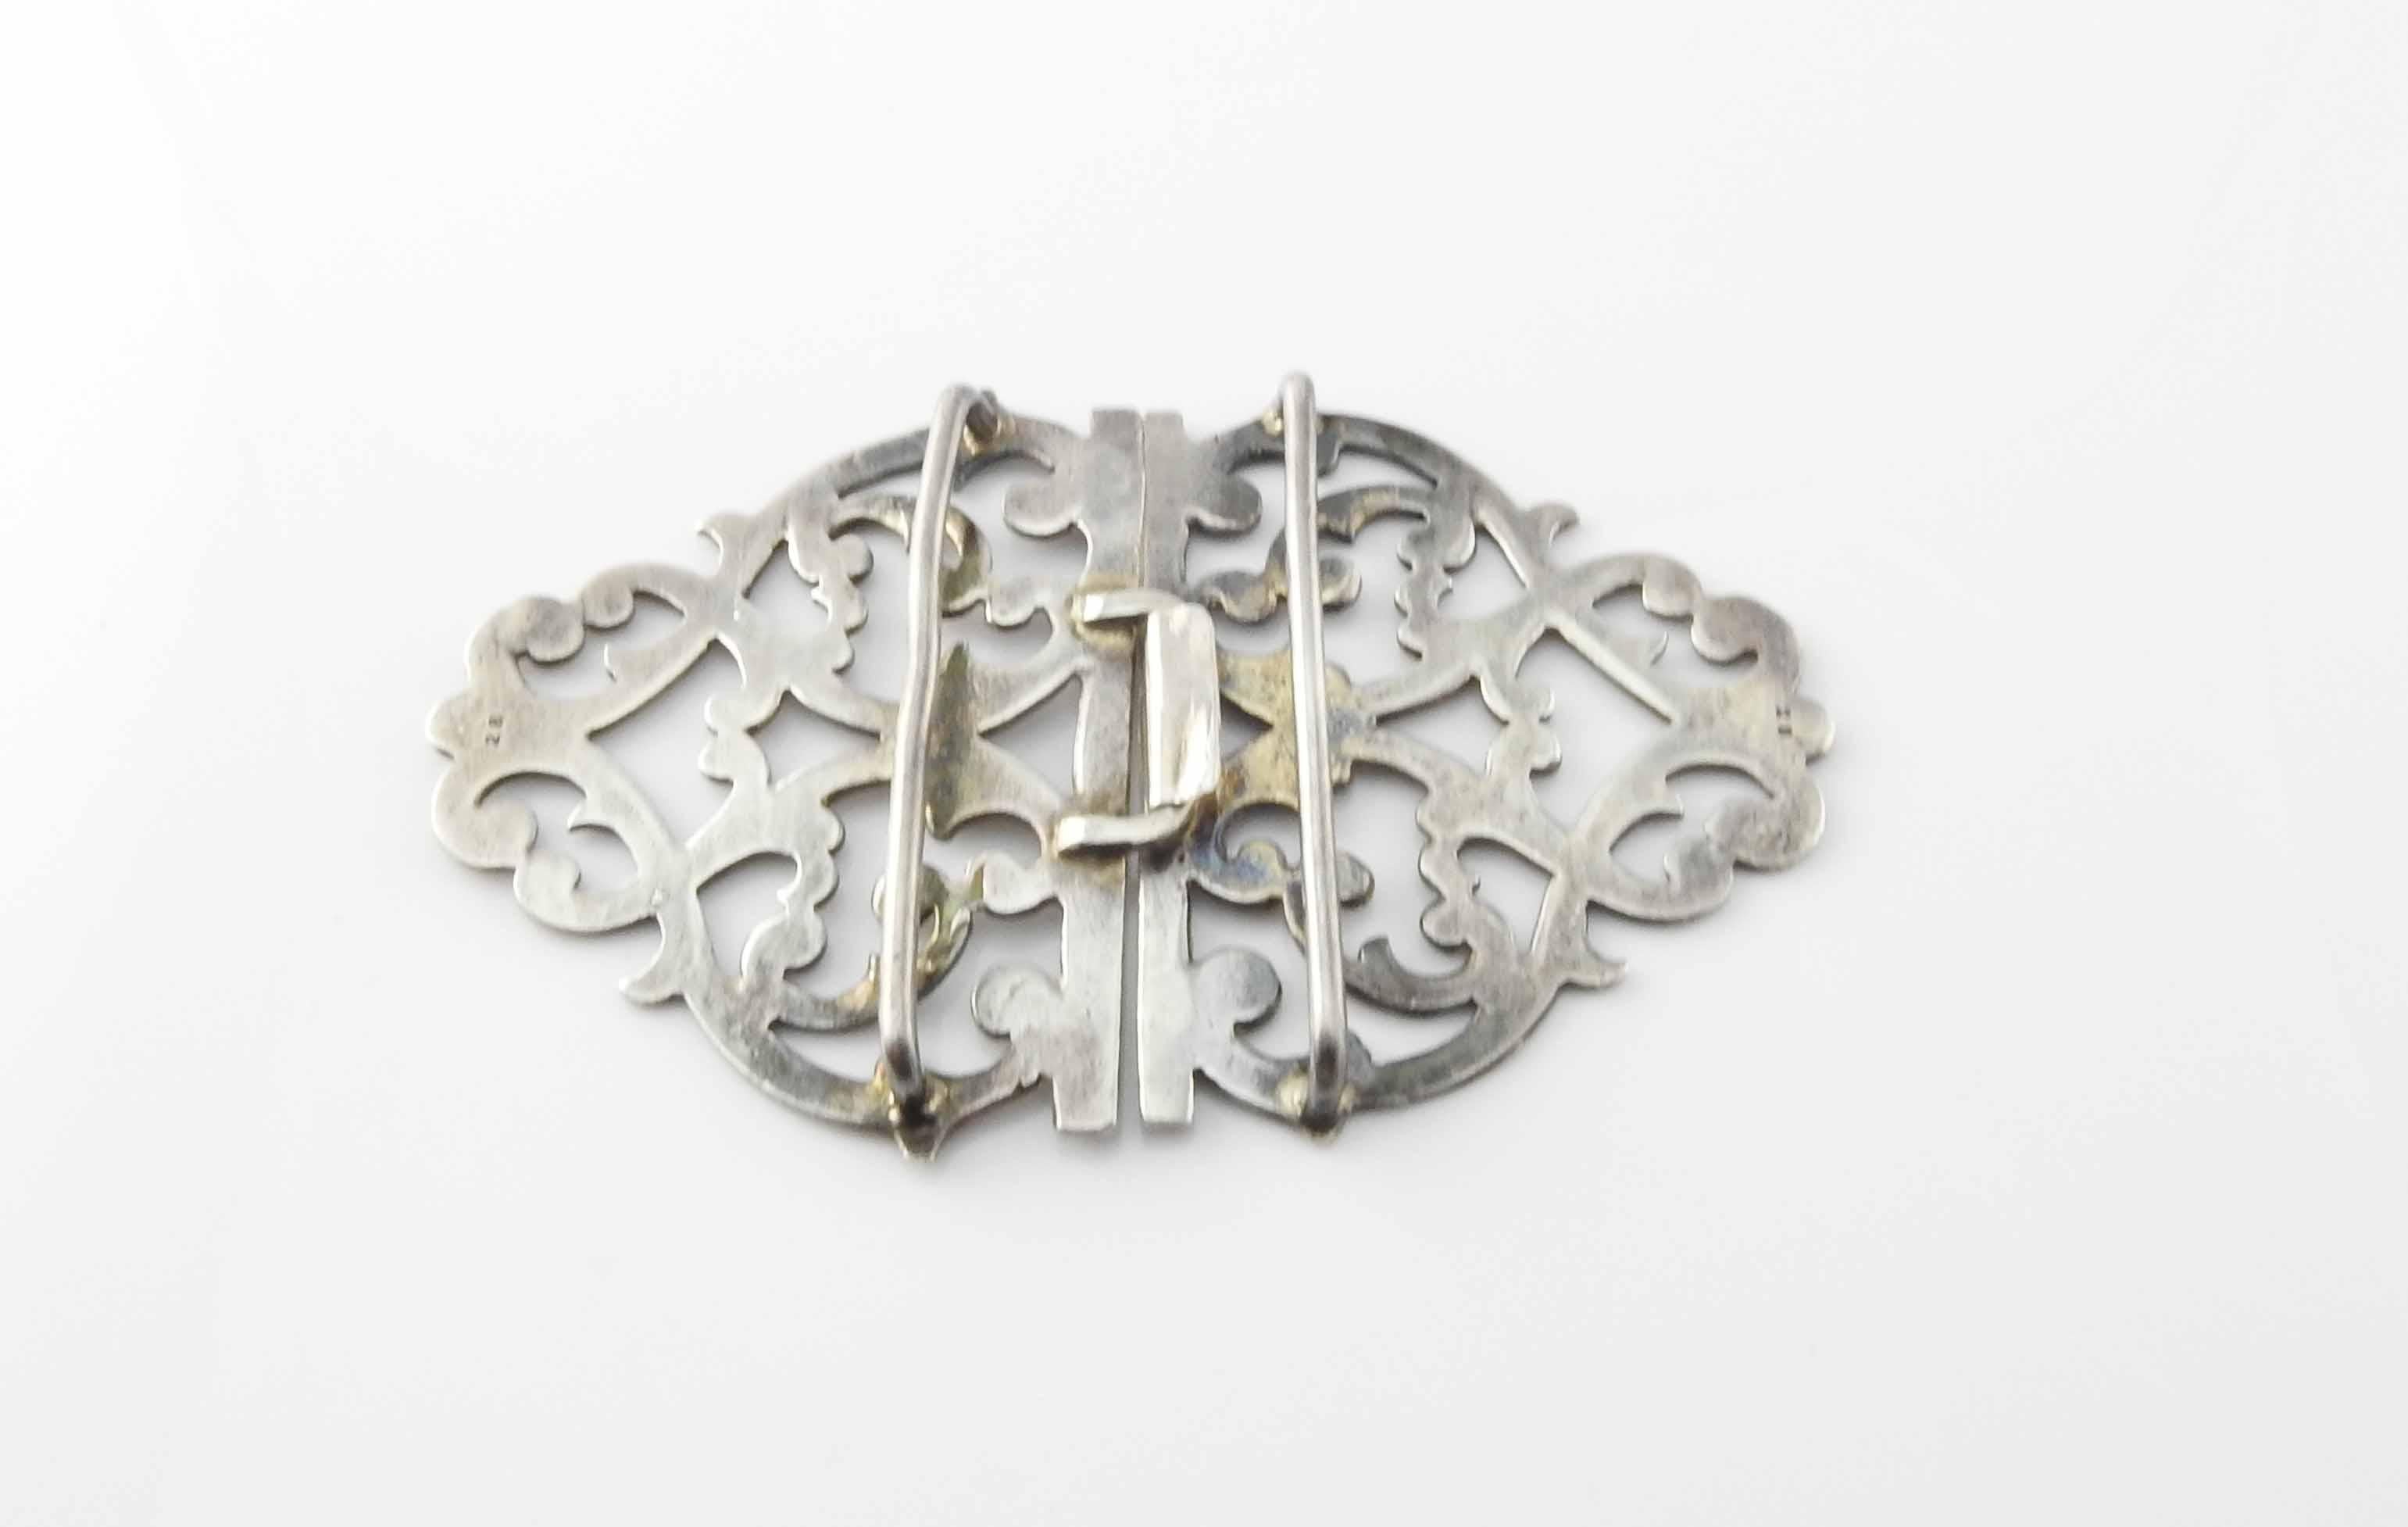 Sterling silver nurses buckle by JHL London.

Marked: JHL Lion (sterling silver), leopard (London city mark), O (1969 year mark) on one side of buckle, lion and leopard mark on other side of buckle. Also marked 28 on both sides of the back of the